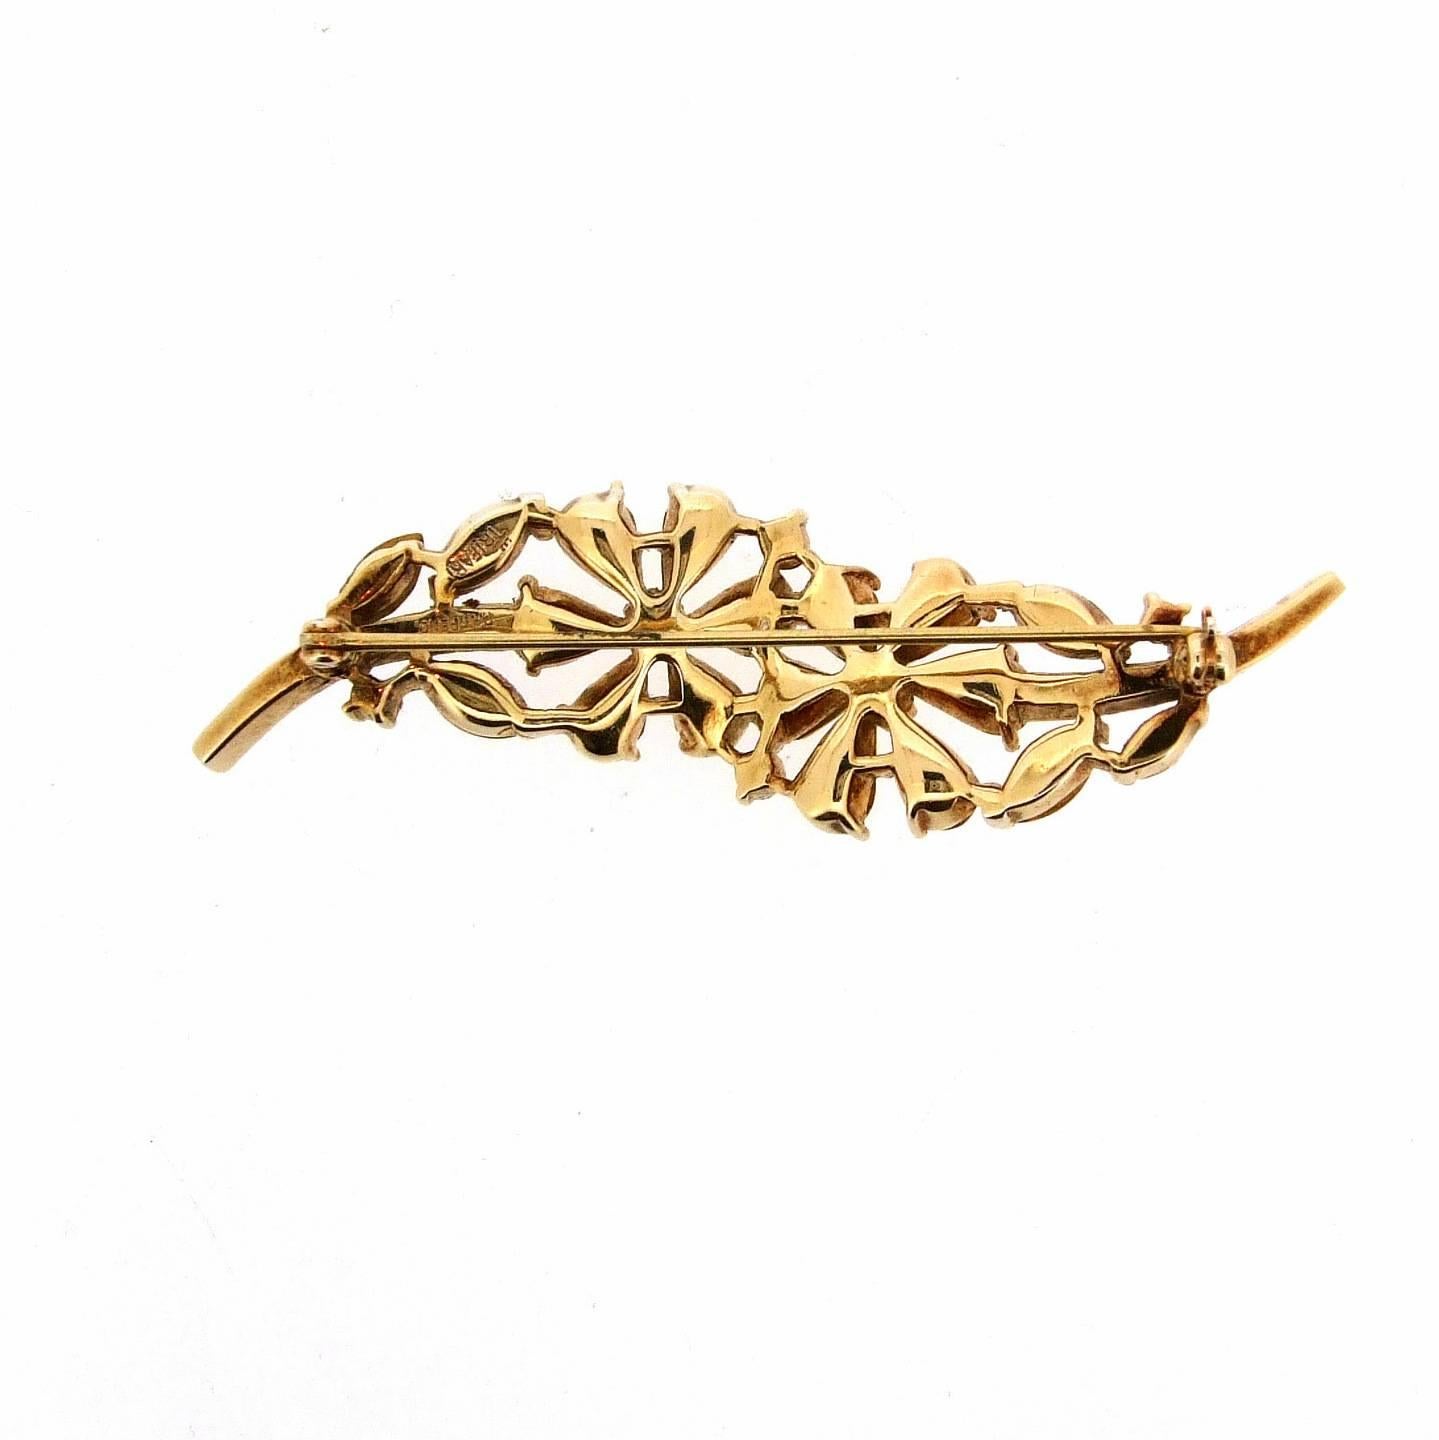 A beautiful floral three tone yellow citrine effect crystal brooch by Trfari accentuated with clear baguette stones. 

We also have the matching bracelet for sale.

Trifari was founded in the USA by Italian Gustavo Trifari in 1910. Chief